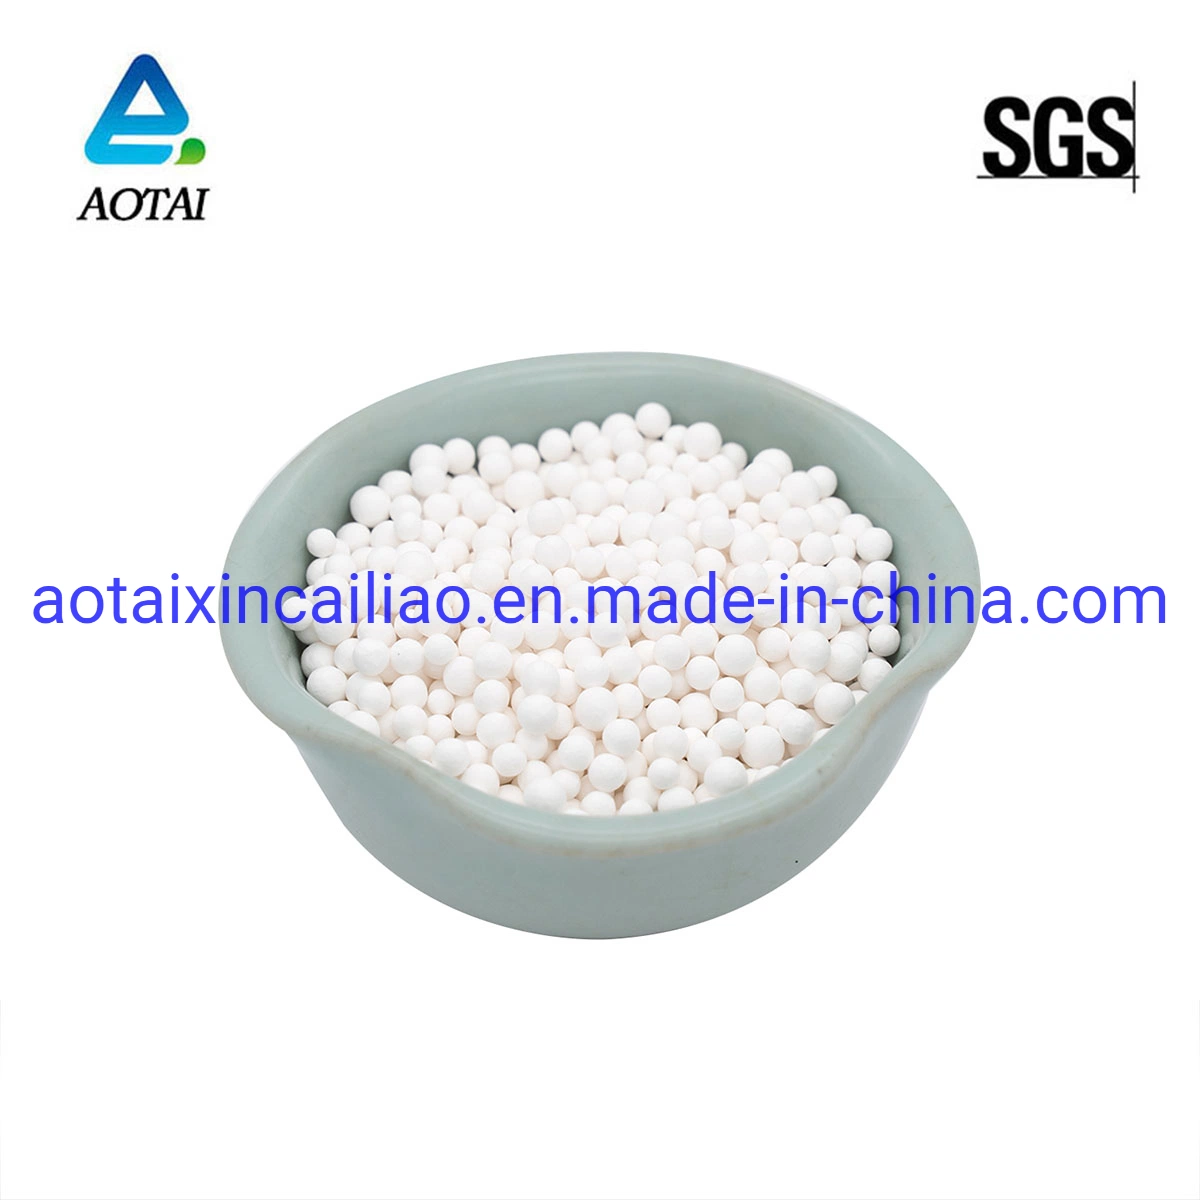 Activated Alumina CAS No. 1344-28-1 with High Surface-Area-to-Weight Ratio Used as a Desiccant